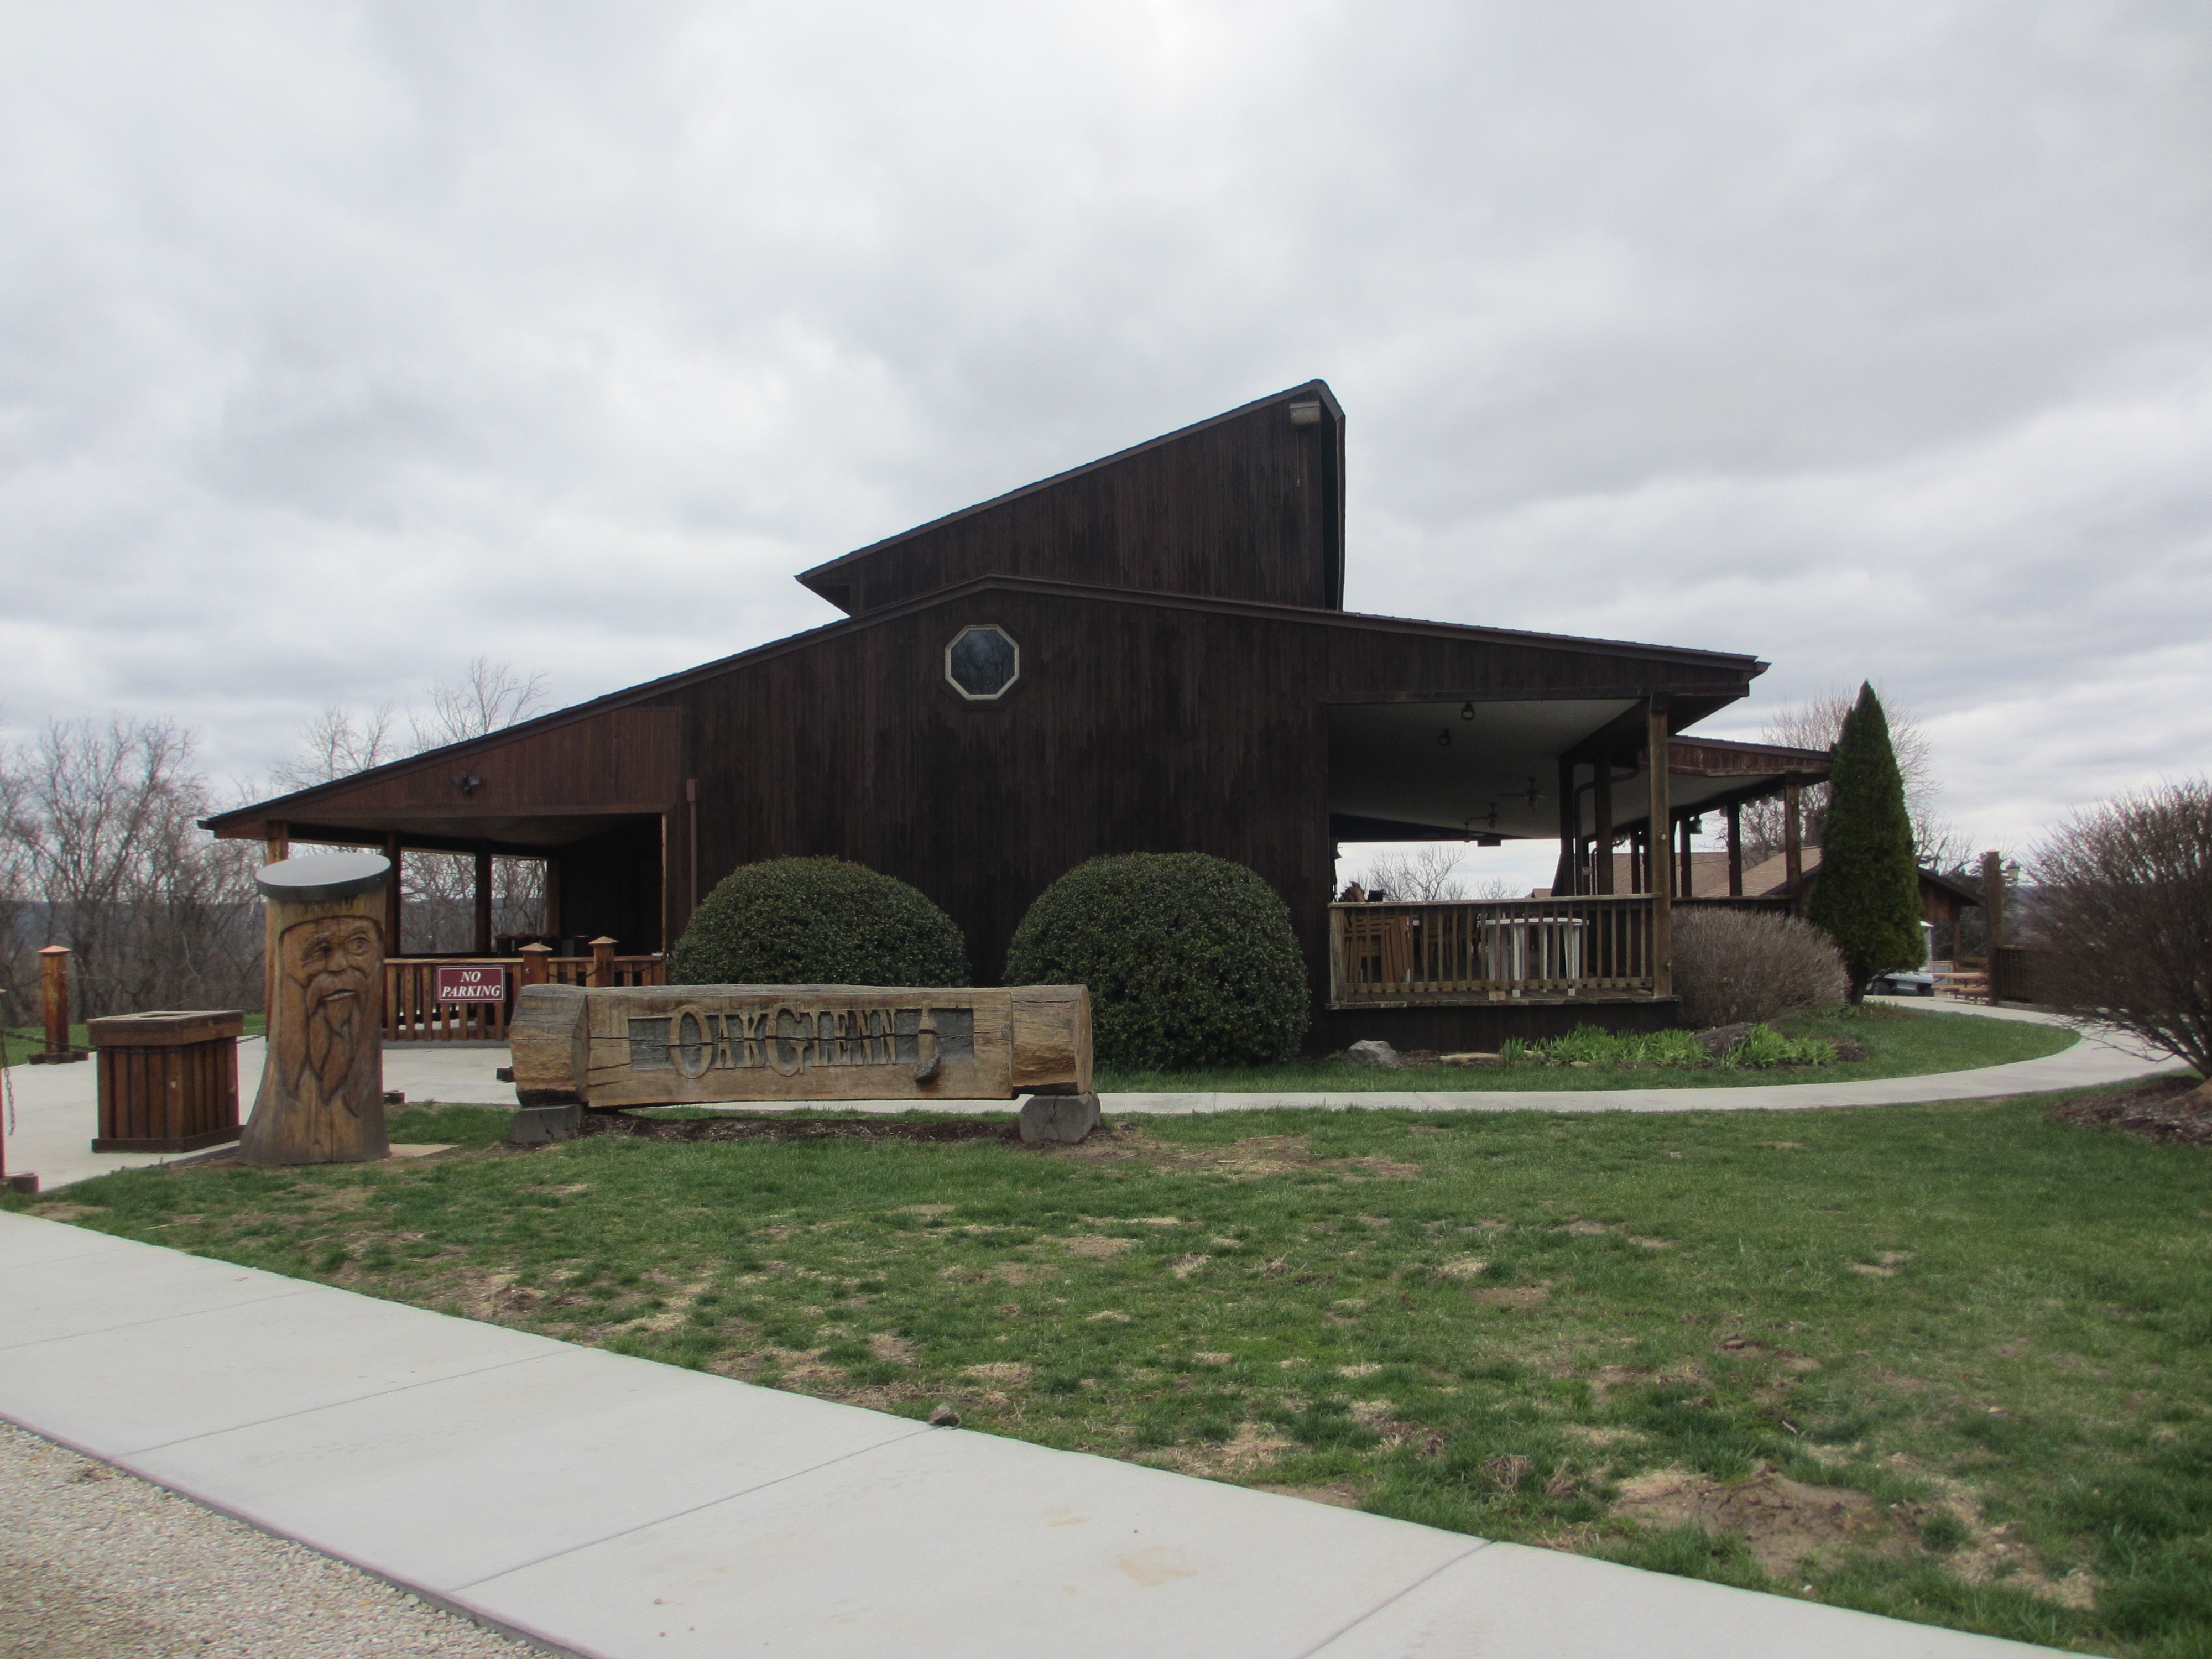 Oak Glenn Winery LLC- Side image of the brown wooden building. There are two decks, one in front and one behind.